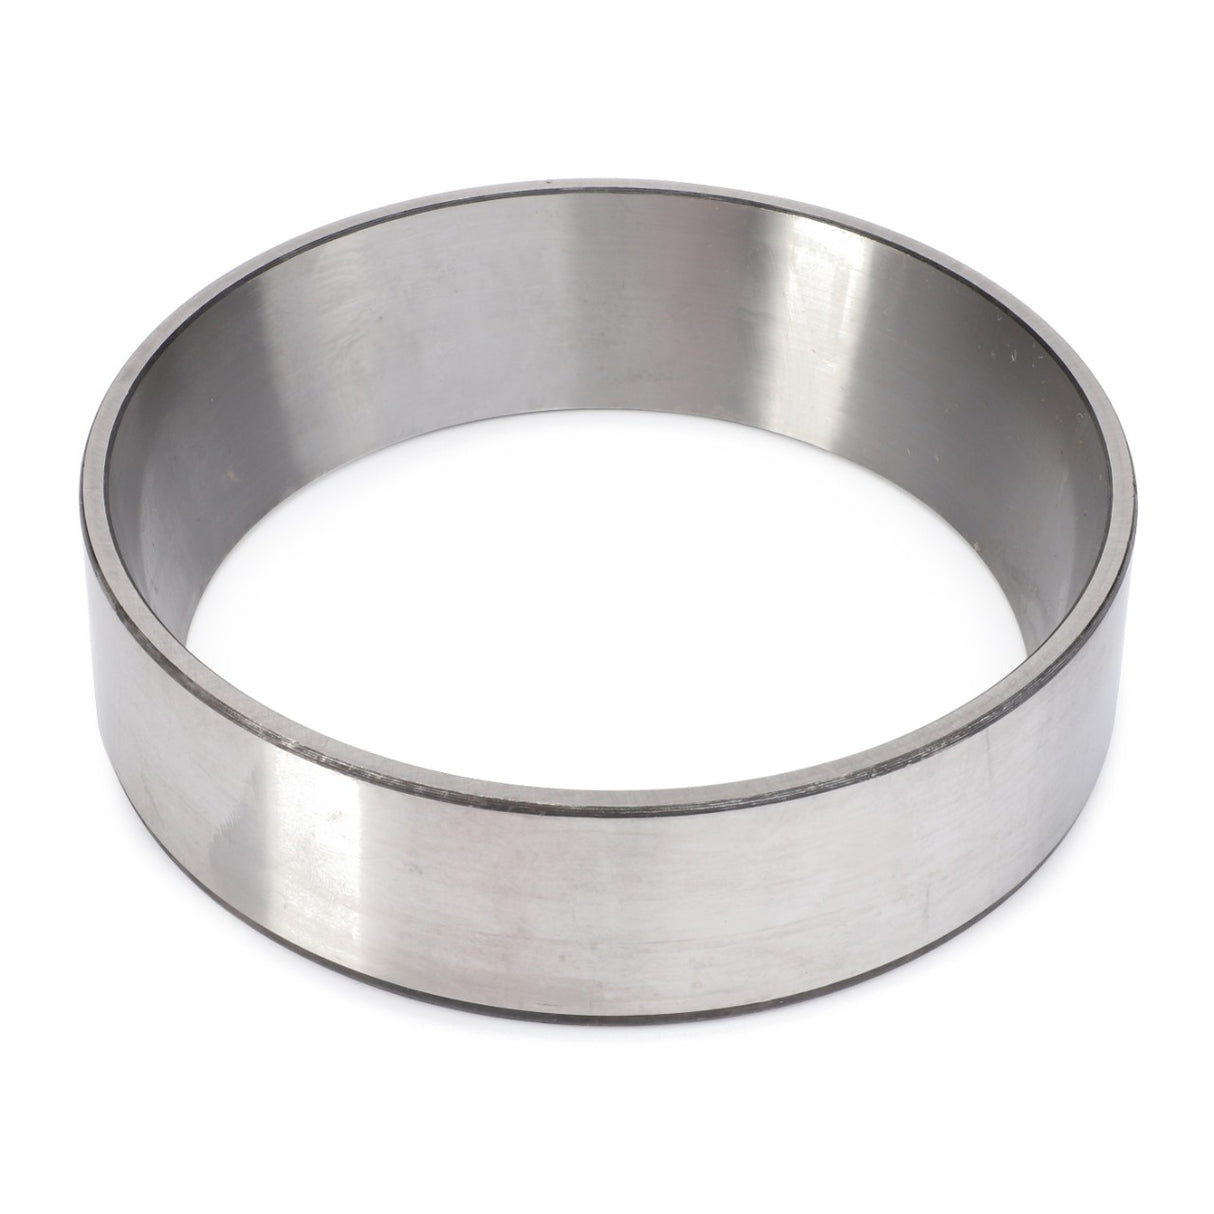 AGCO | Bearing Cup - CH1P-5420